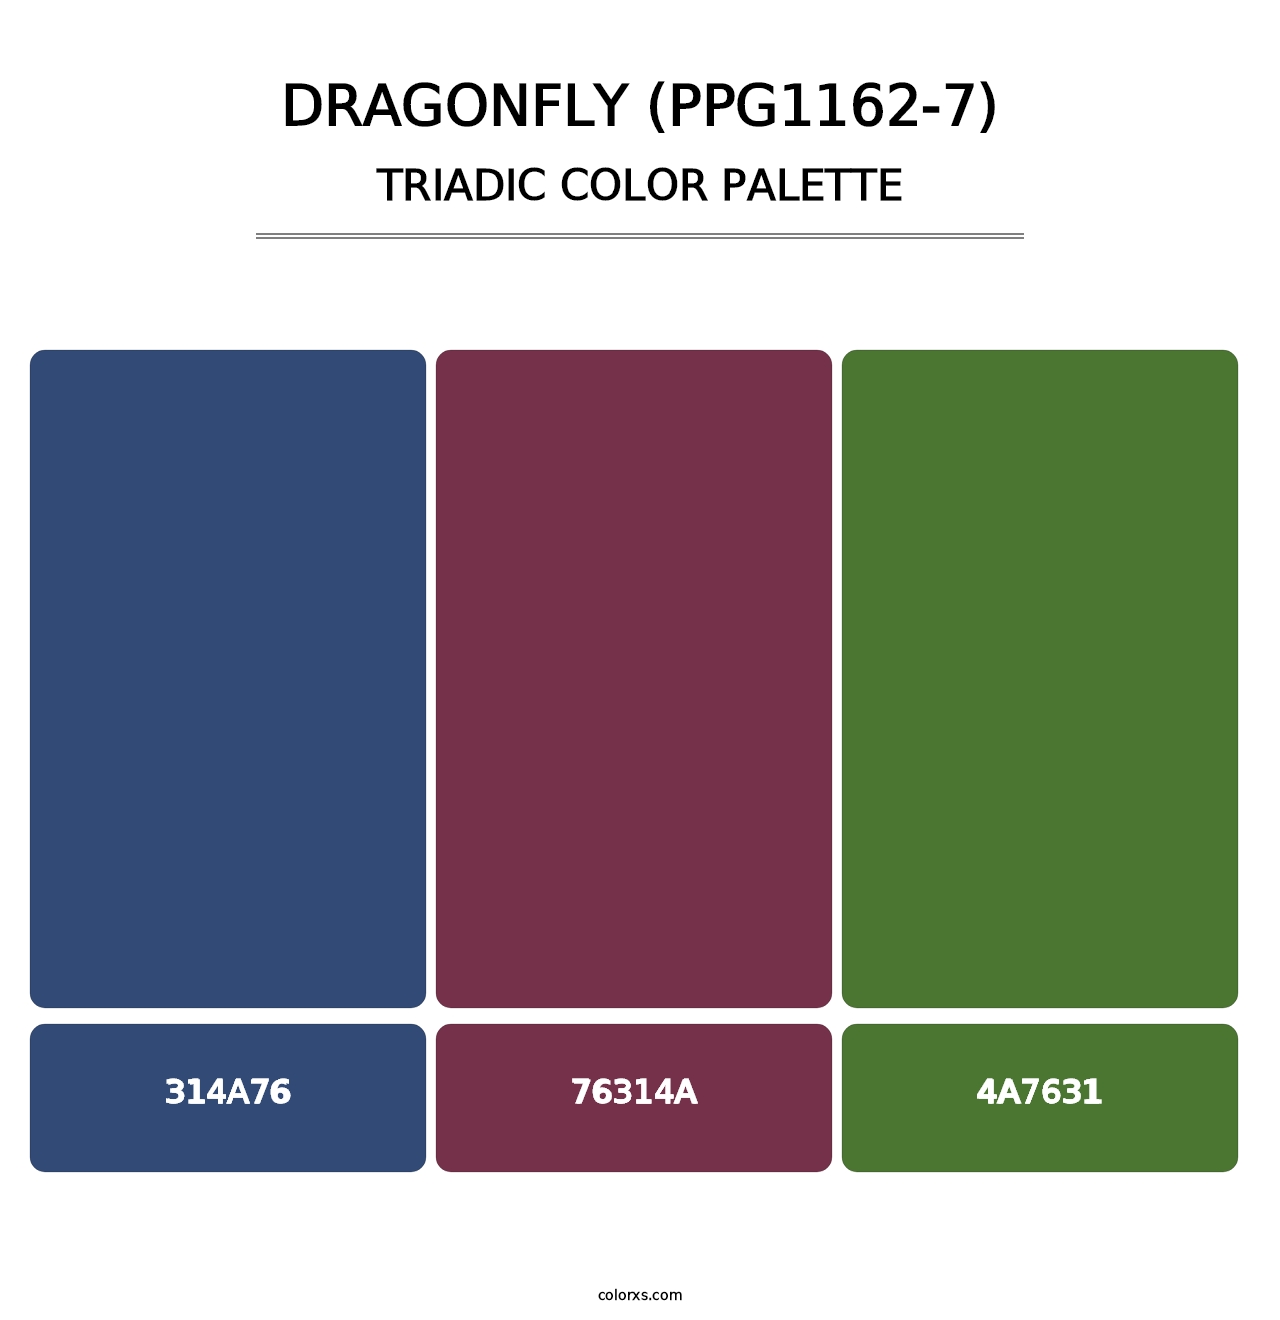 Dragonfly (PPG1162-7) - Triadic Color Palette